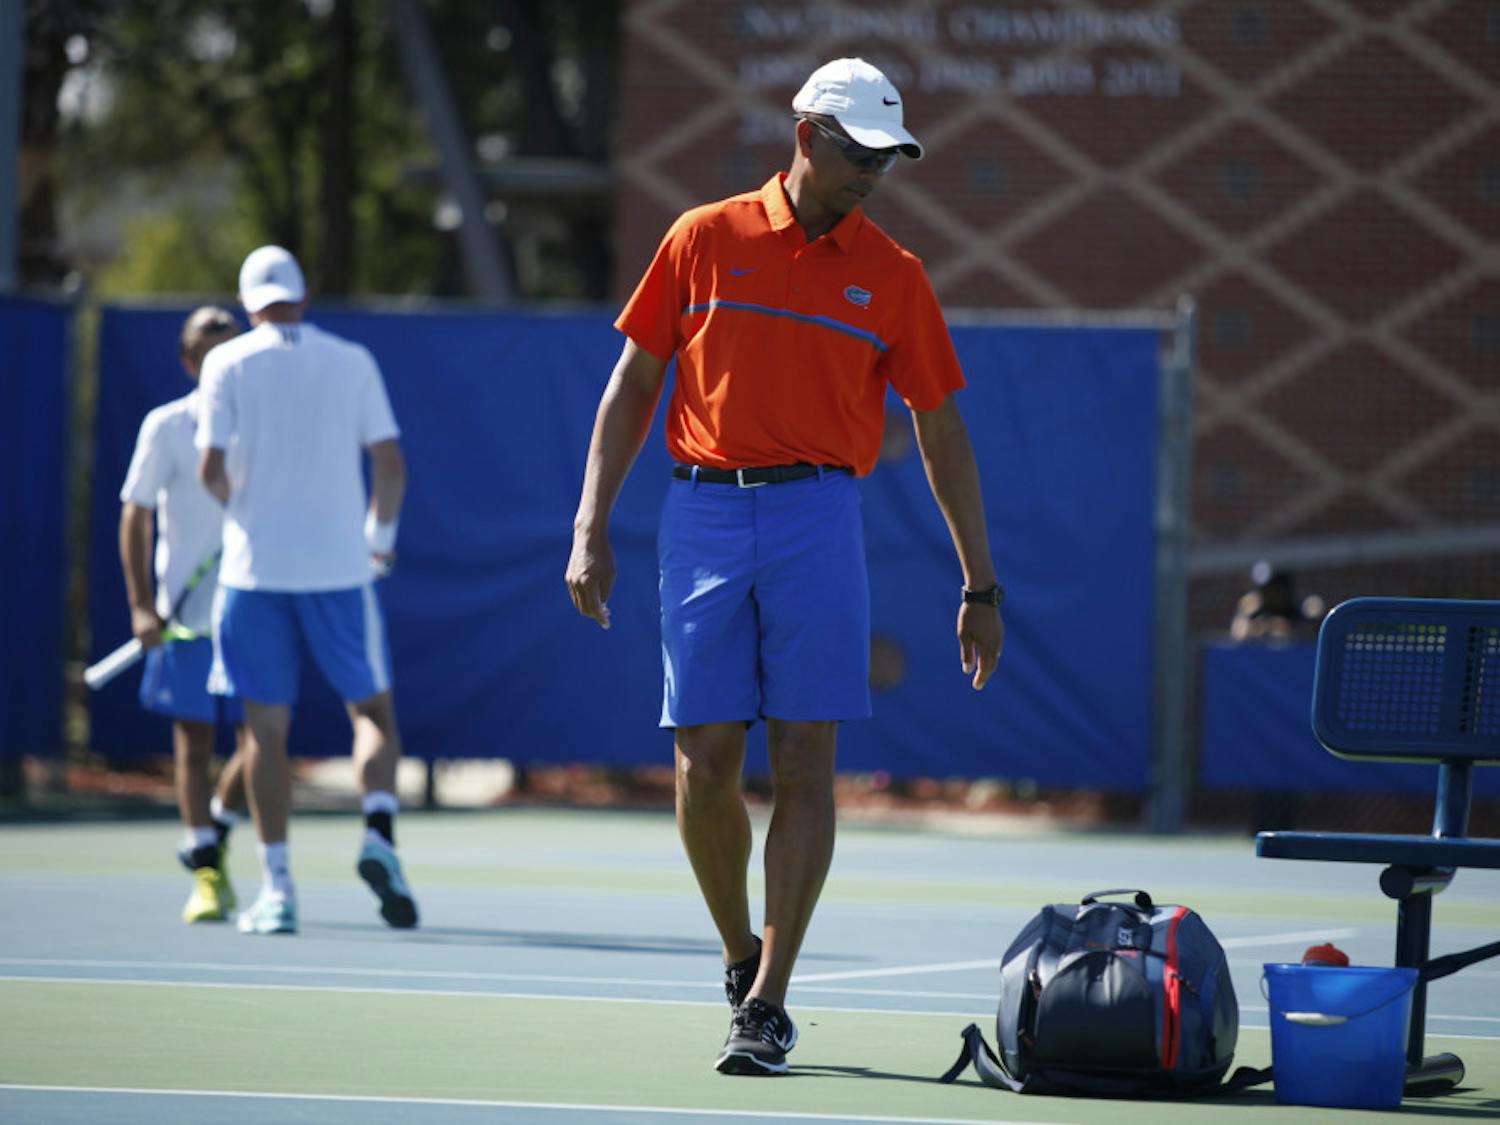 The Florida men's tennis team fell just short of reaching its first ever national championship match, losing to Texas in the NCAA semifinals.